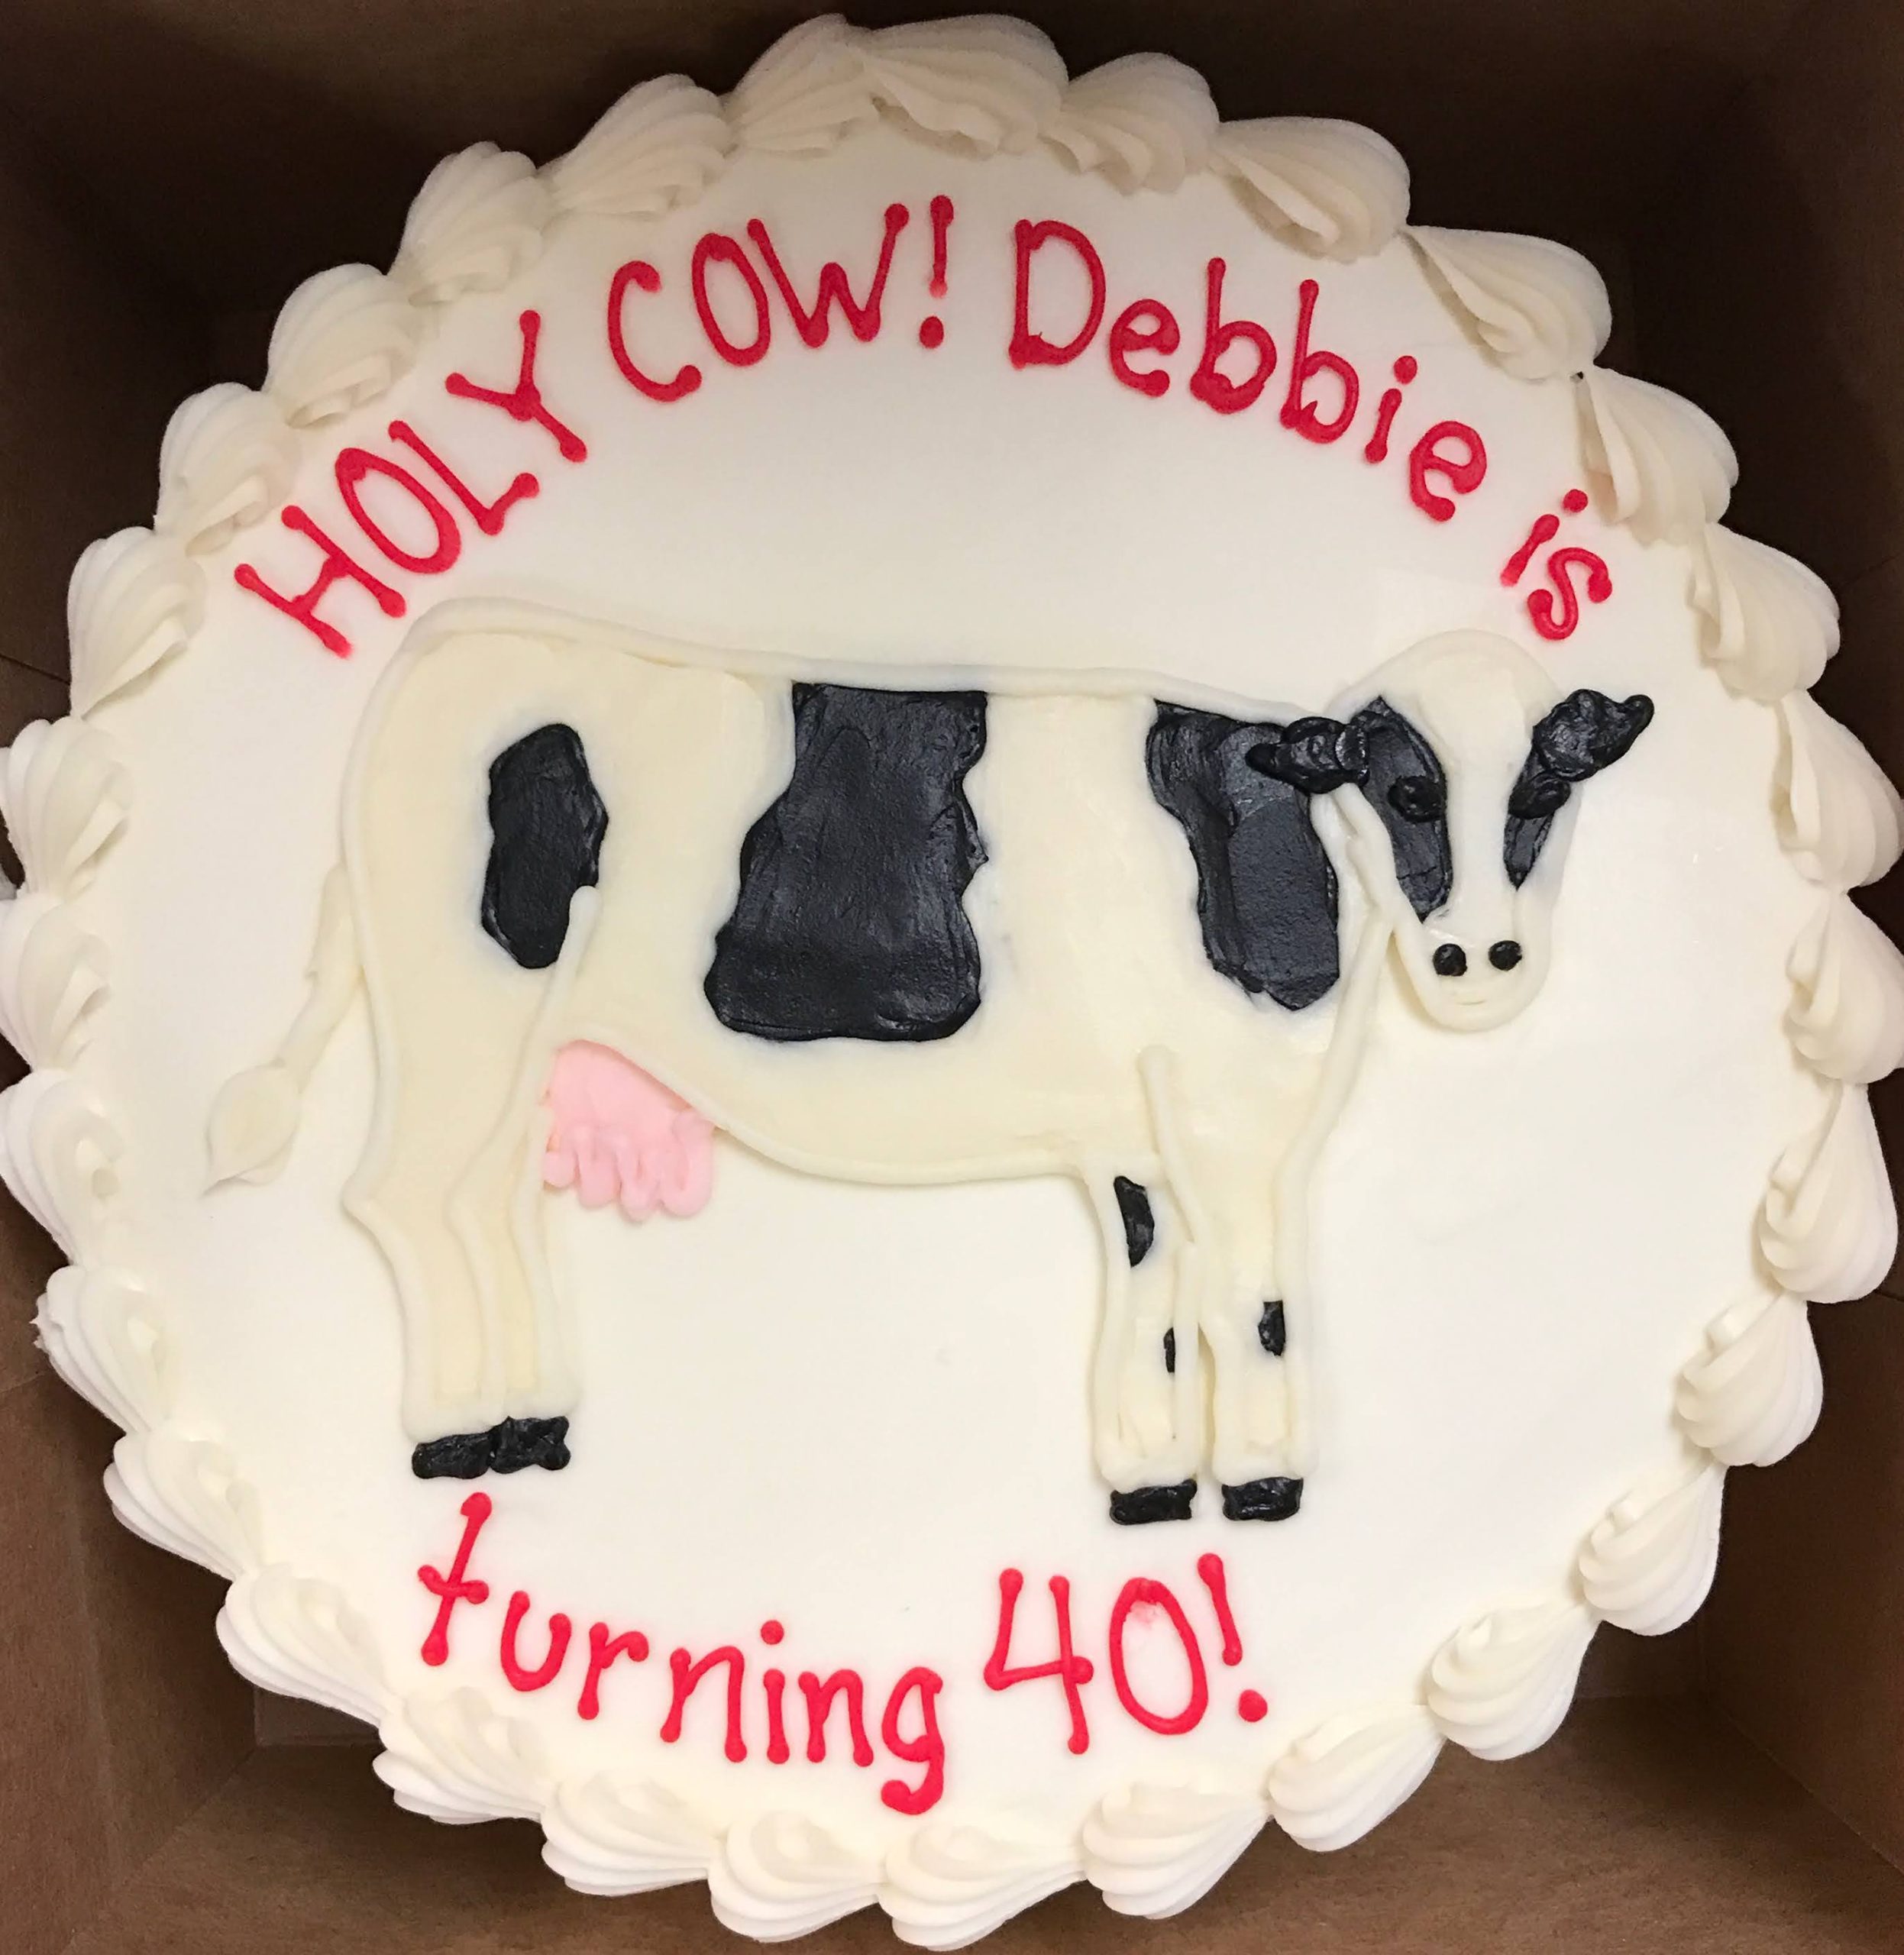 HOLY COW SUPRISE BIRTHDAY PARTY CELELBRATION CAKE FOR KIDS AND ADULTS IN CHICAGO